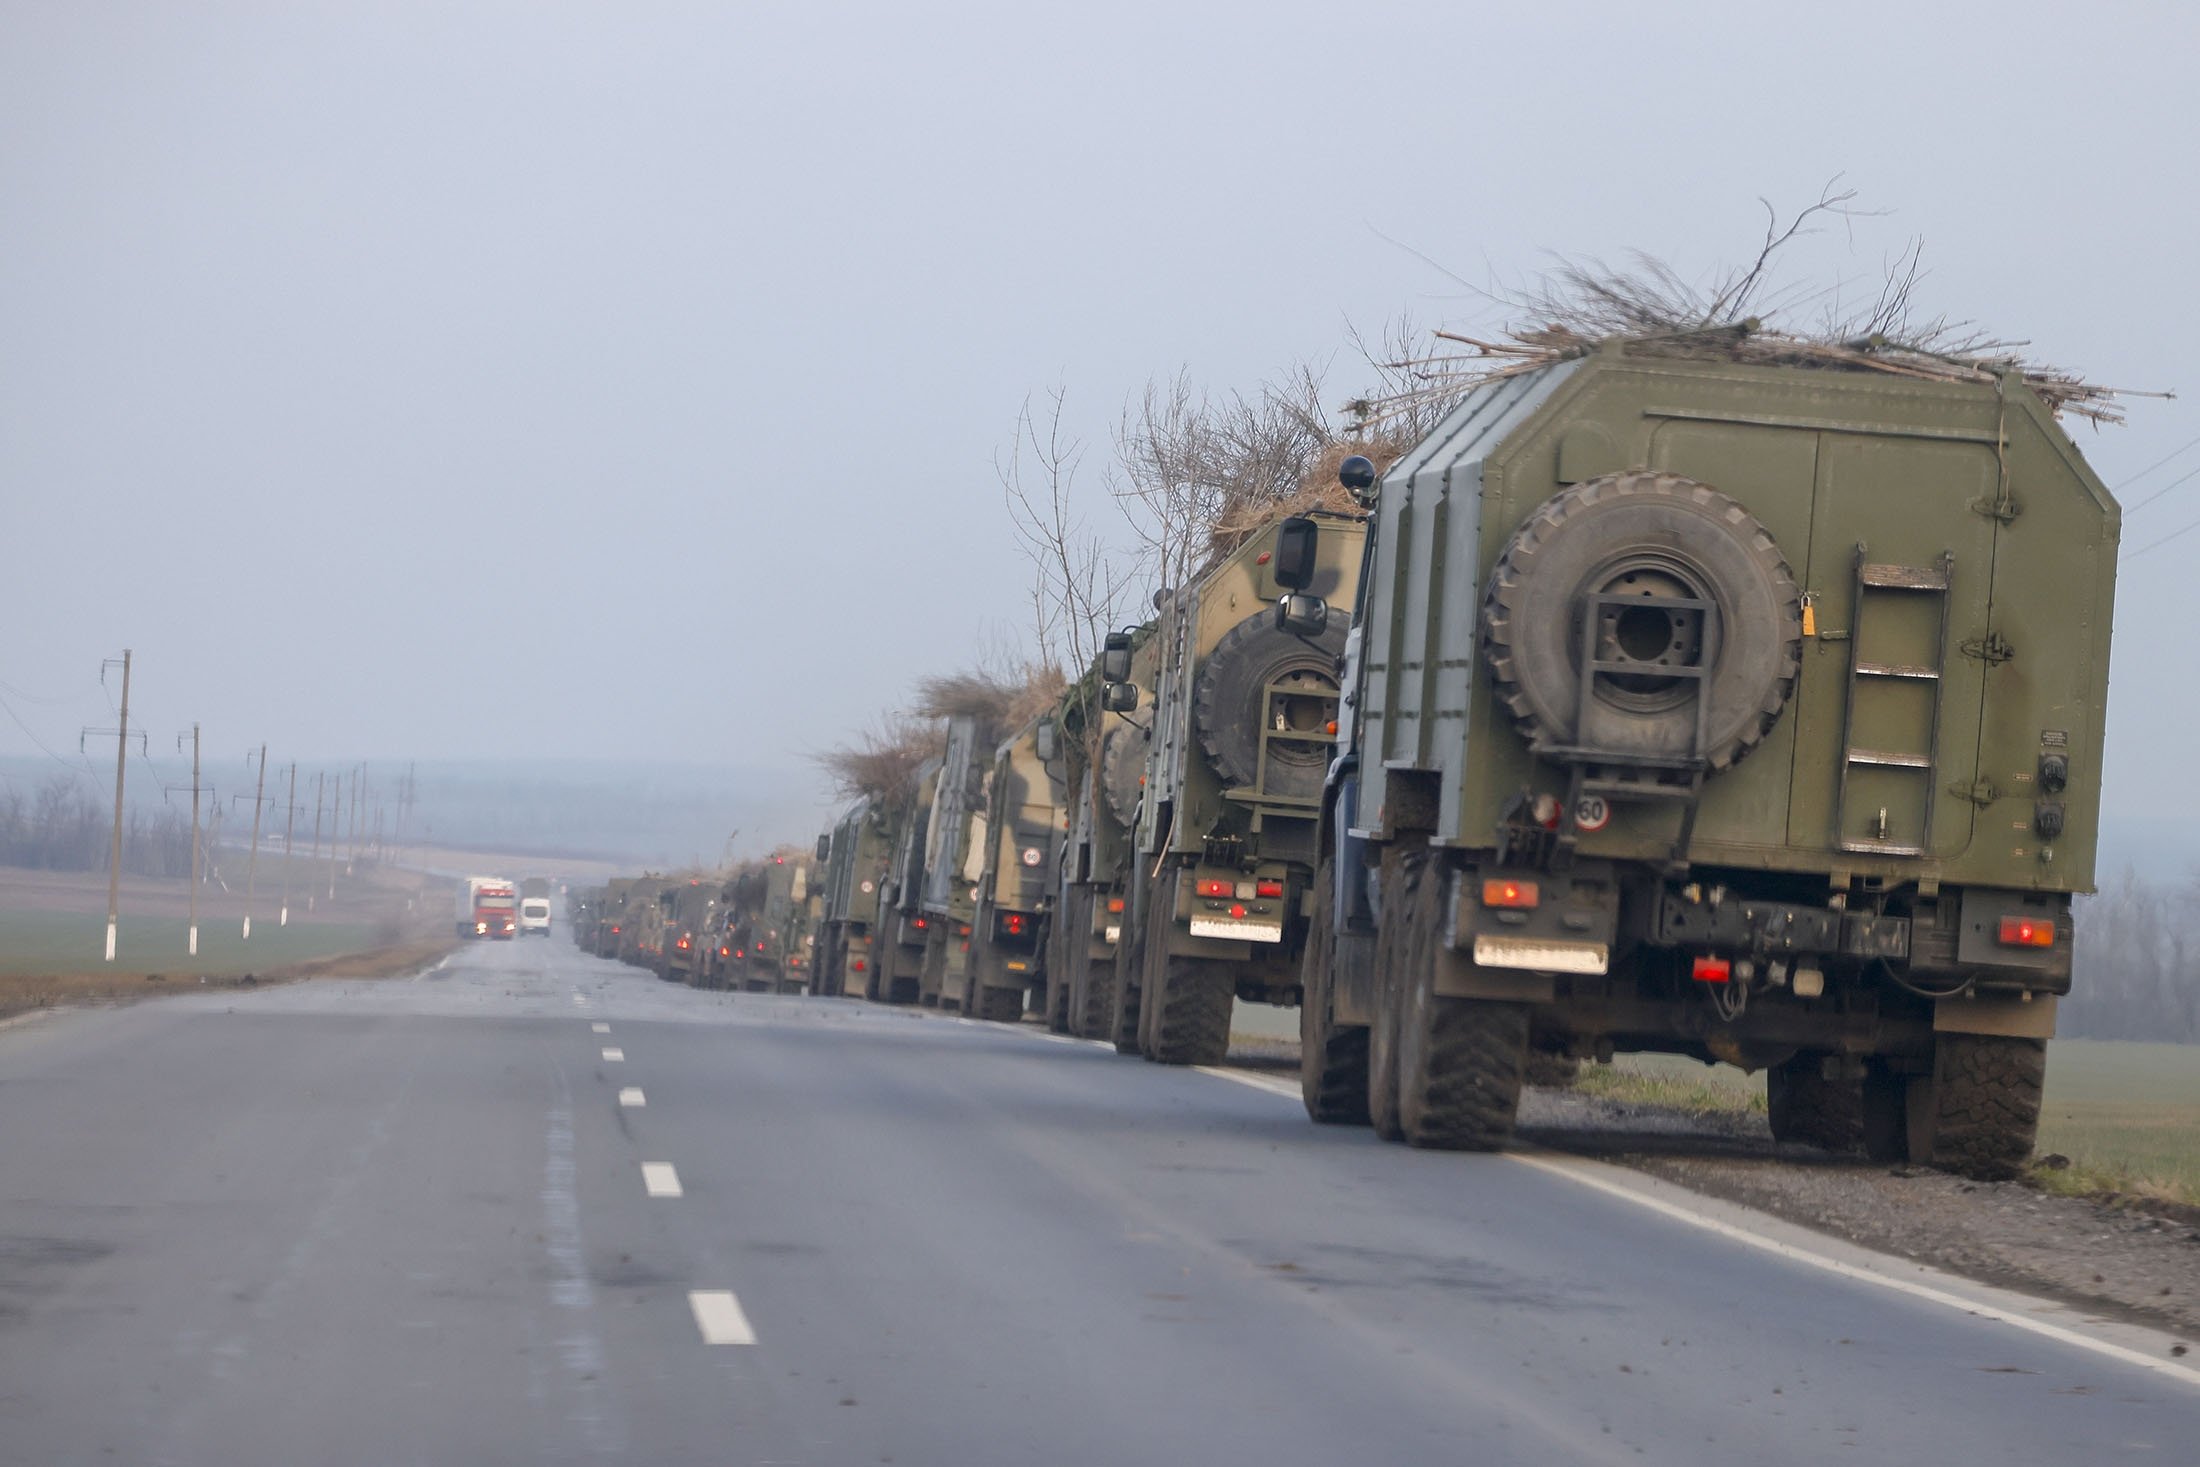 Russian military convoy moving towards border in Donbass region